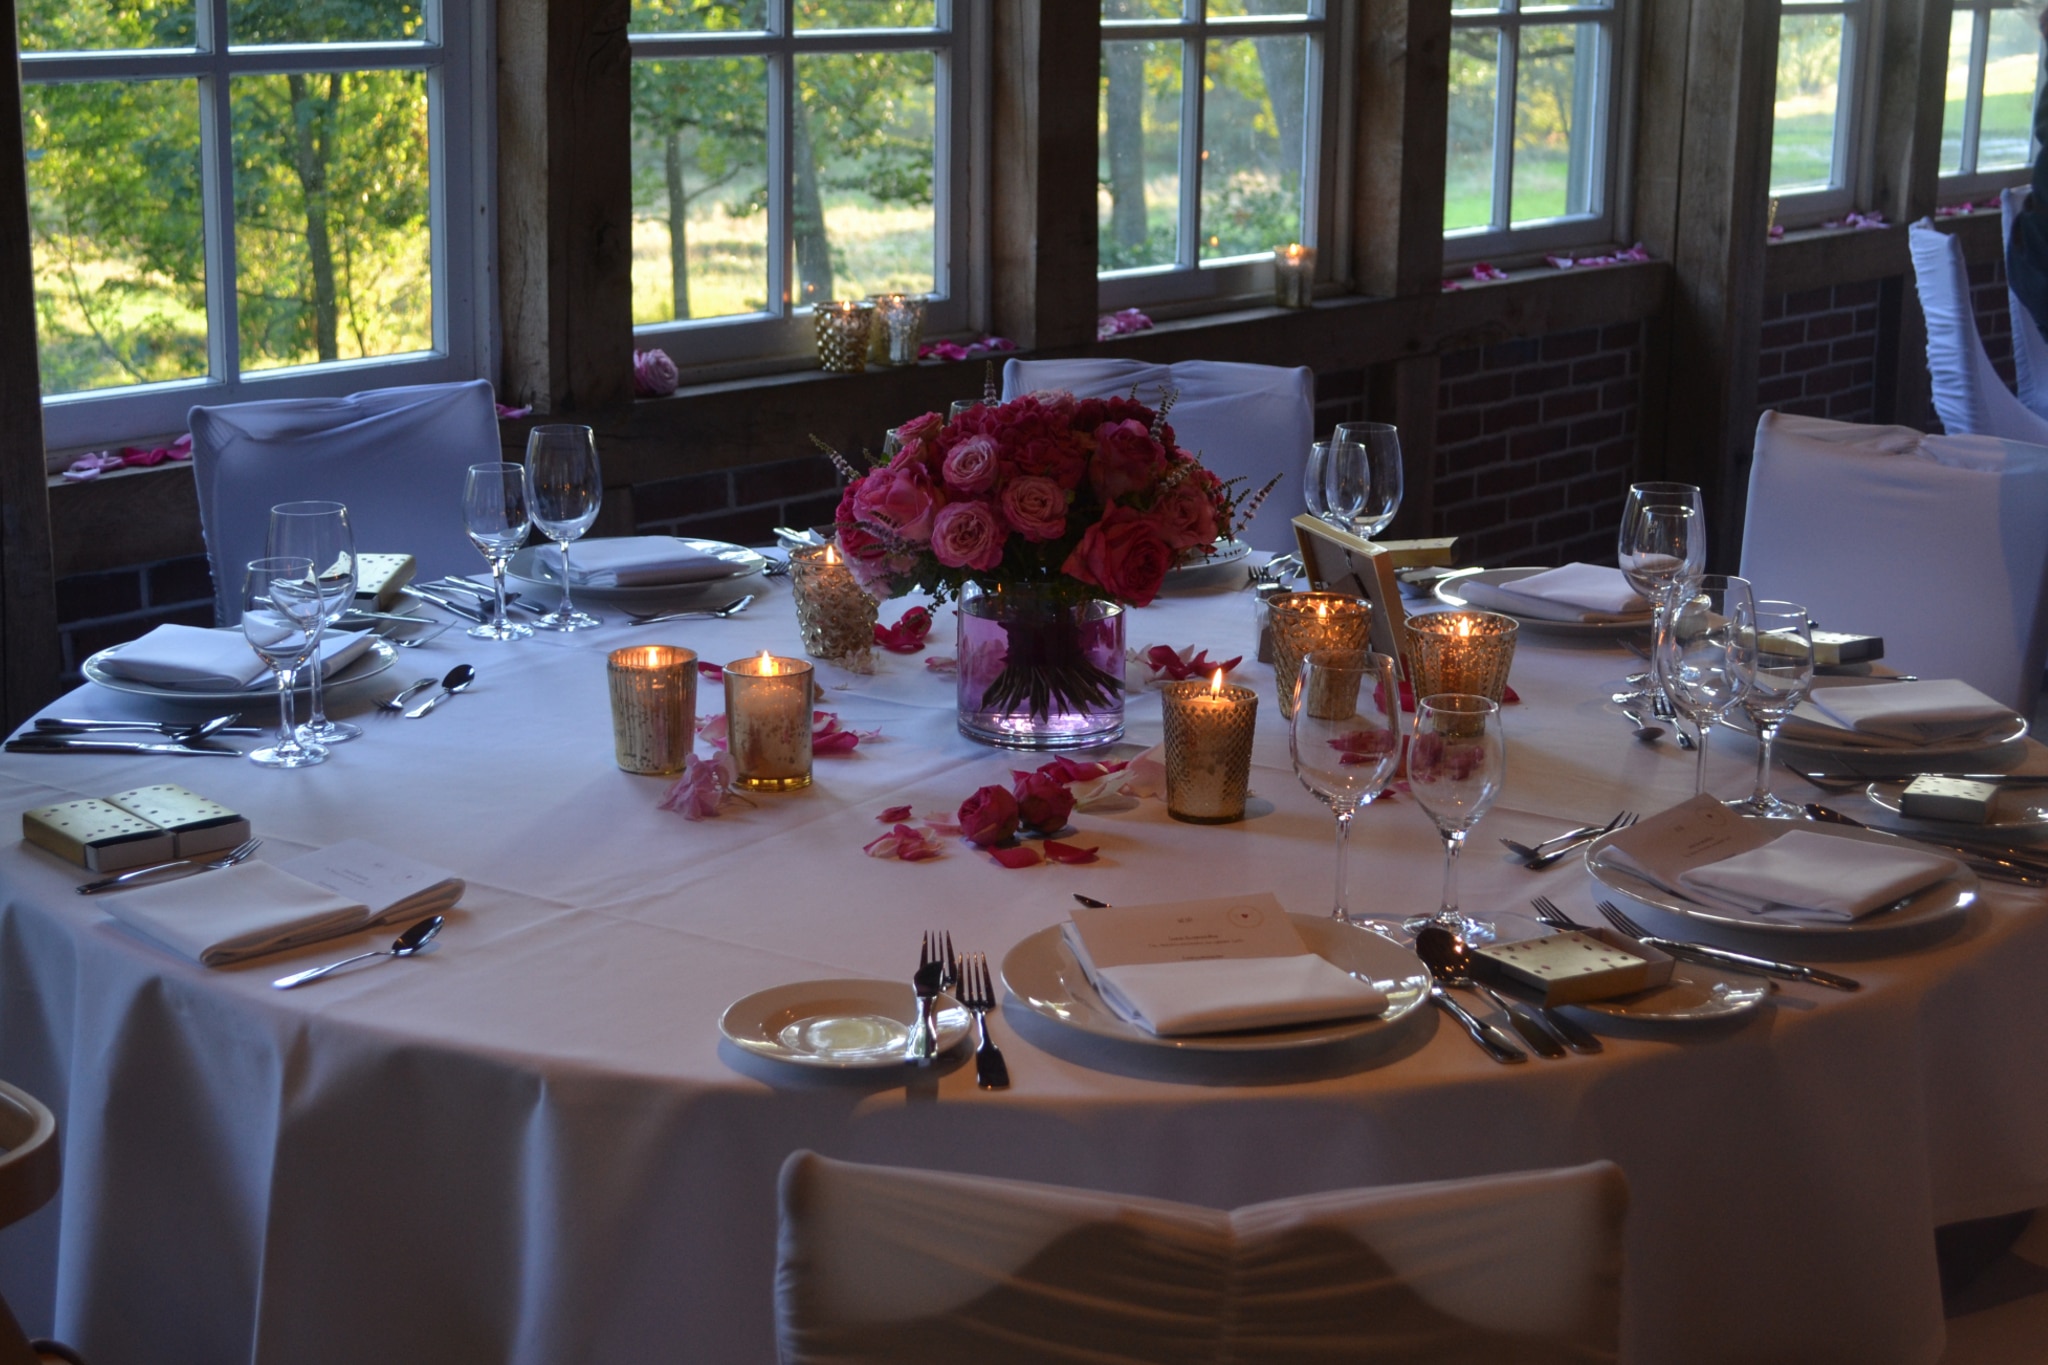 Celebrating a wedding at Landhaus Haverbeckhof: Table decoration with pink roses and candles